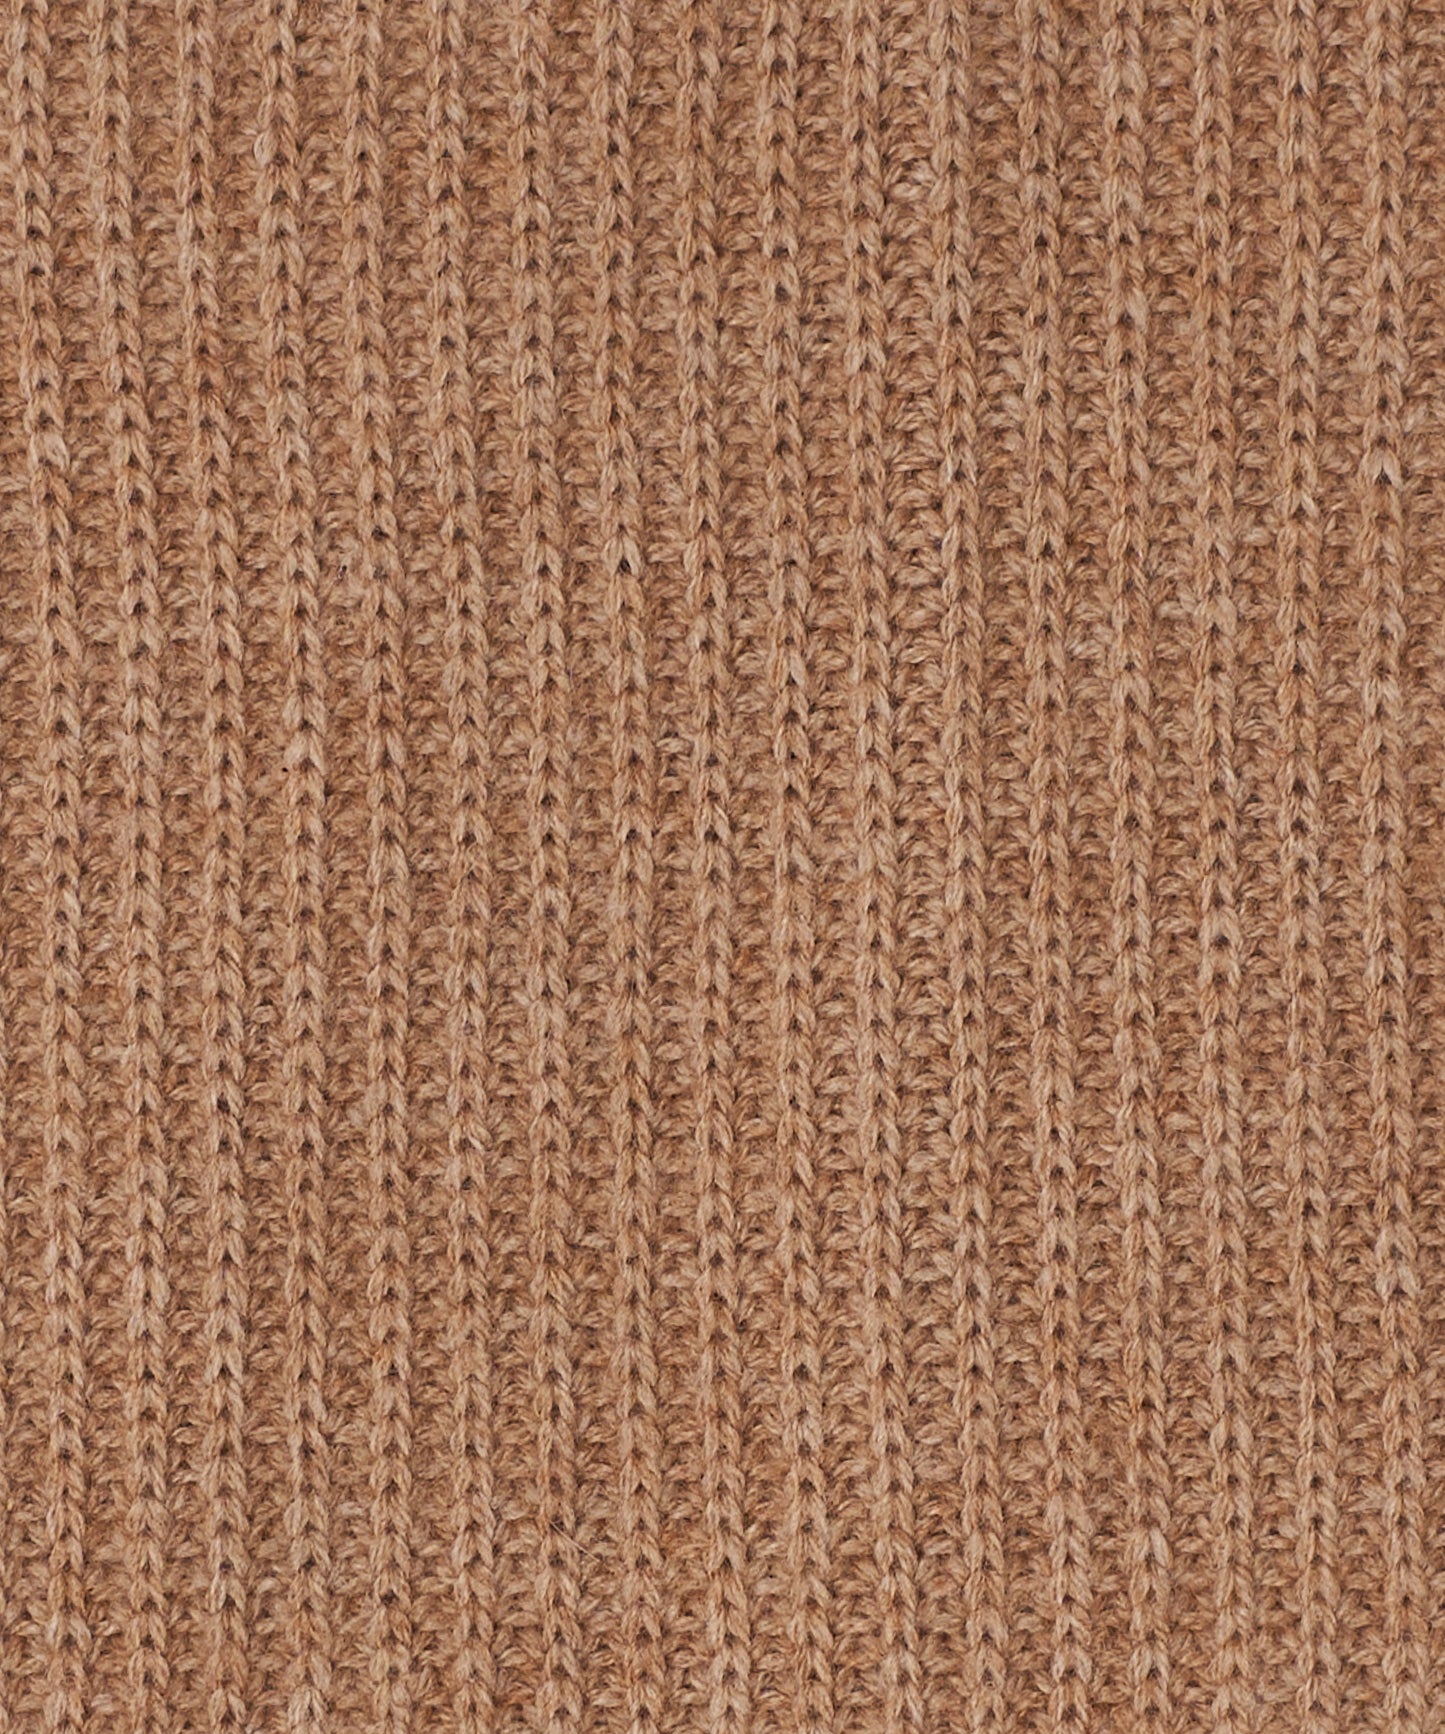 Wool/Cashmere  Neck Warmer in color Camel Heather